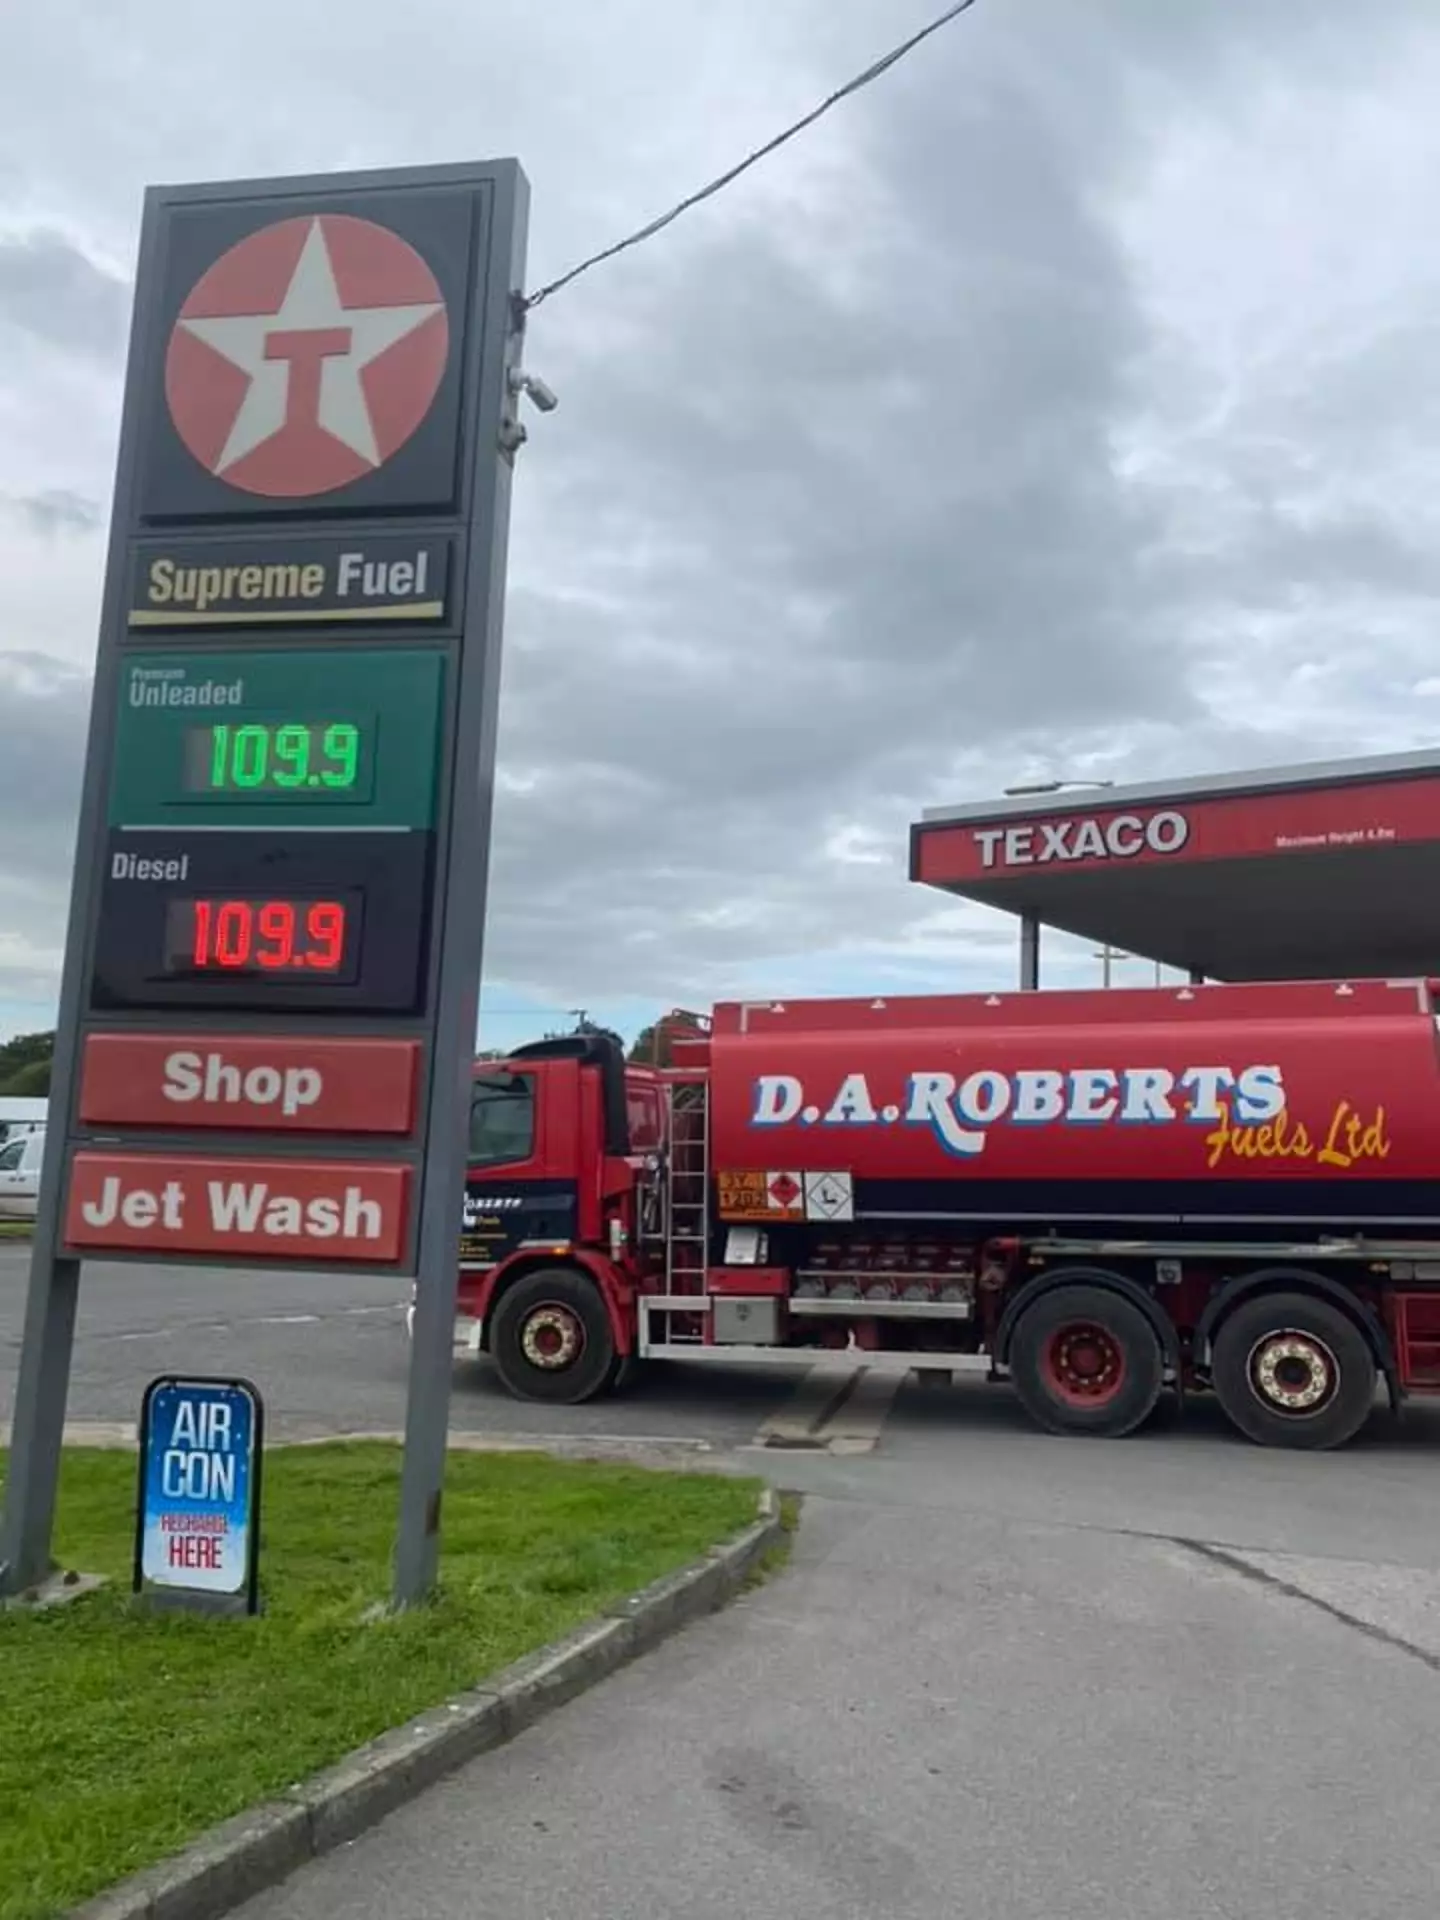 This week, owner Dave Roberts was selling fuel for around 20p less than the UK average.